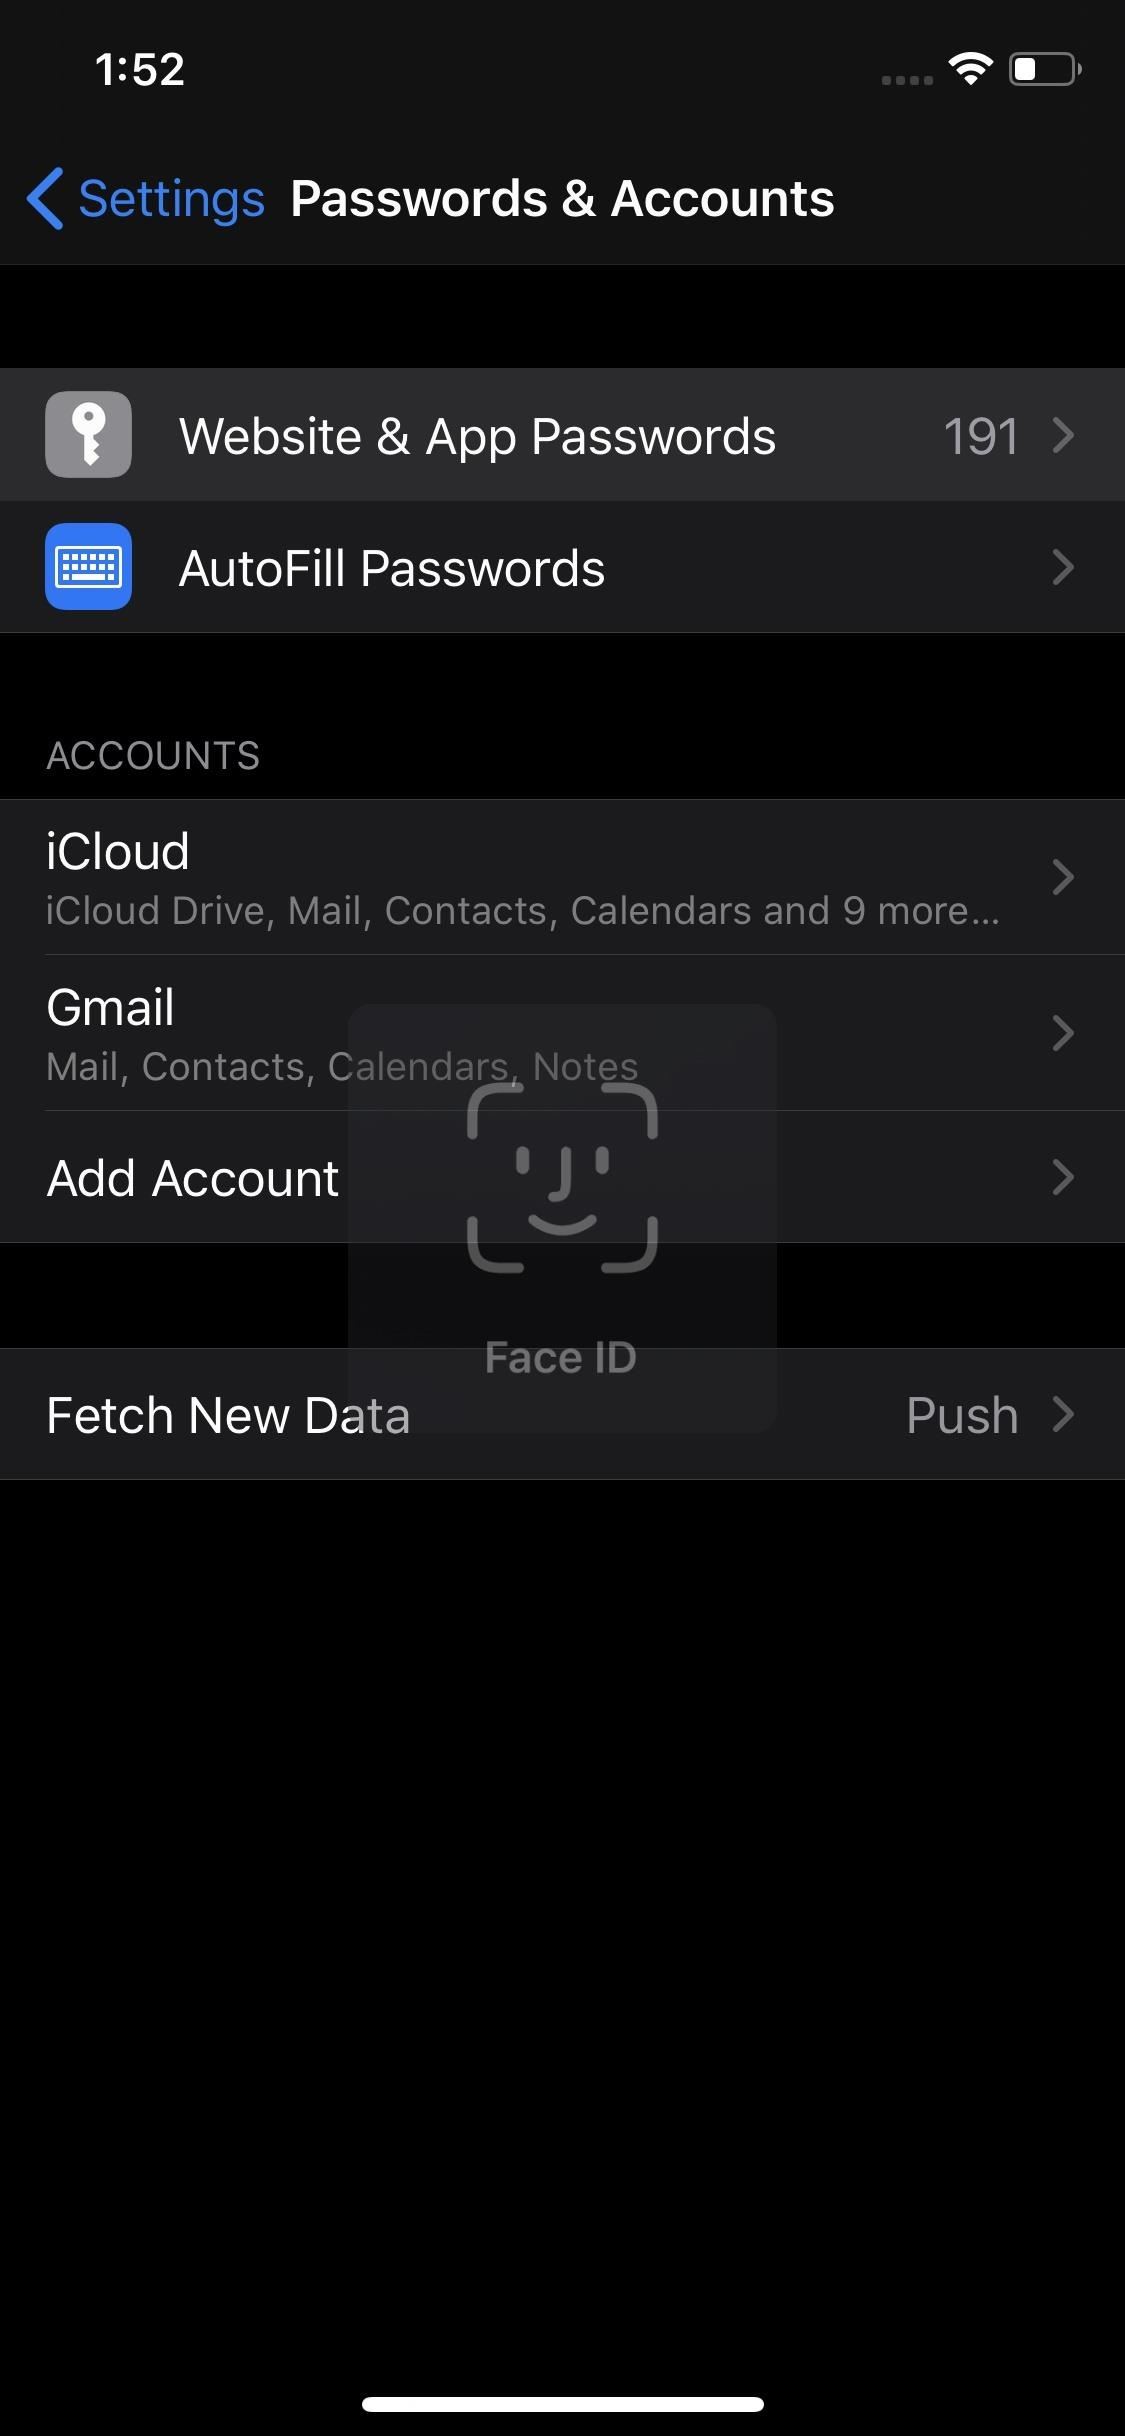 Share Any Password from Your iPhone to Other Apple Devices